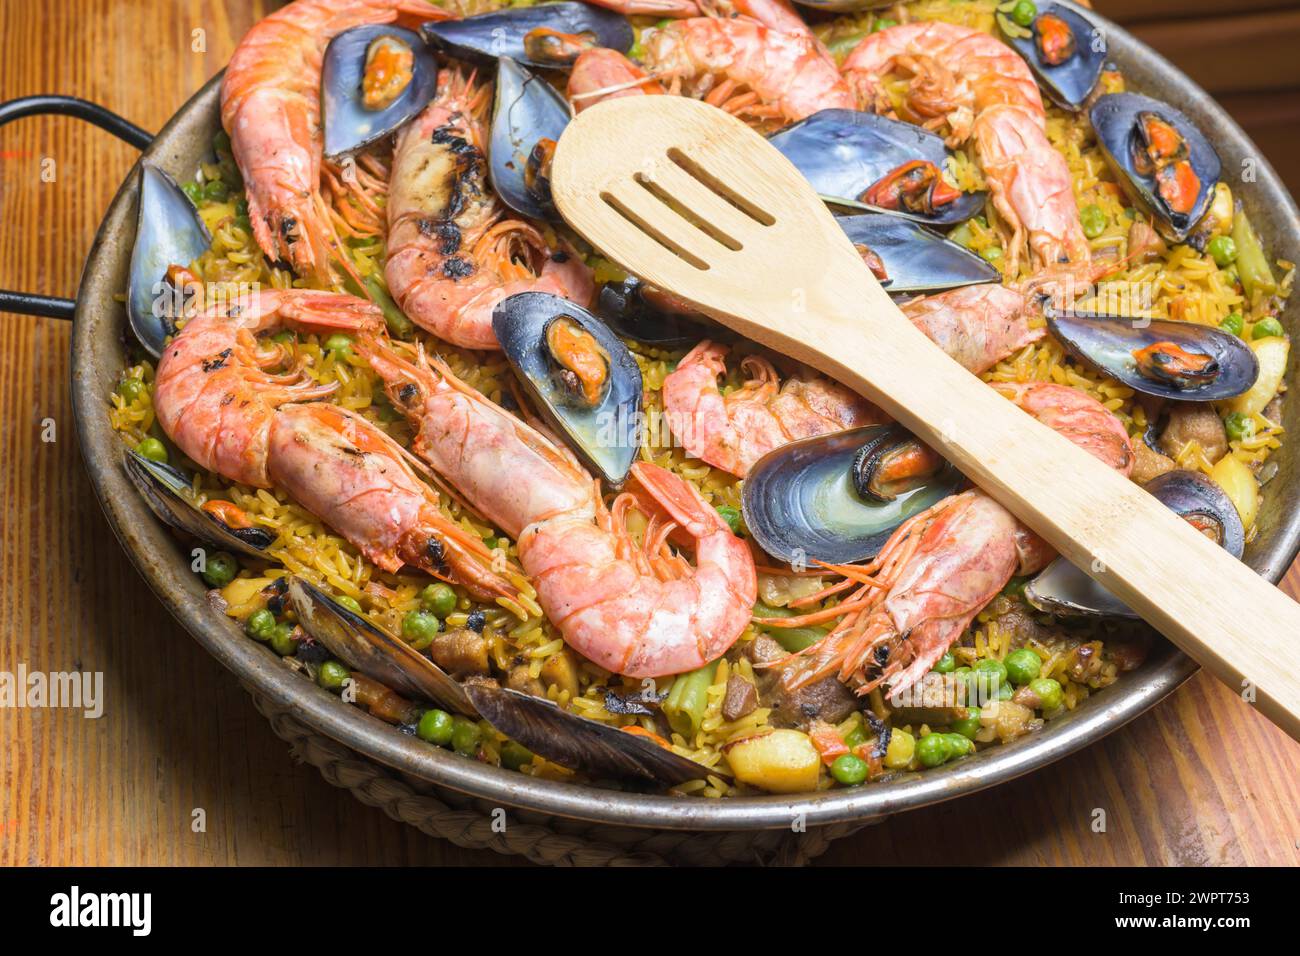 A paella full of seafood, peas, and rice served in a pan with a wooden spoon, typical Spanish cuisine, Majorca, Balearic Islands, Spain Stock Photo